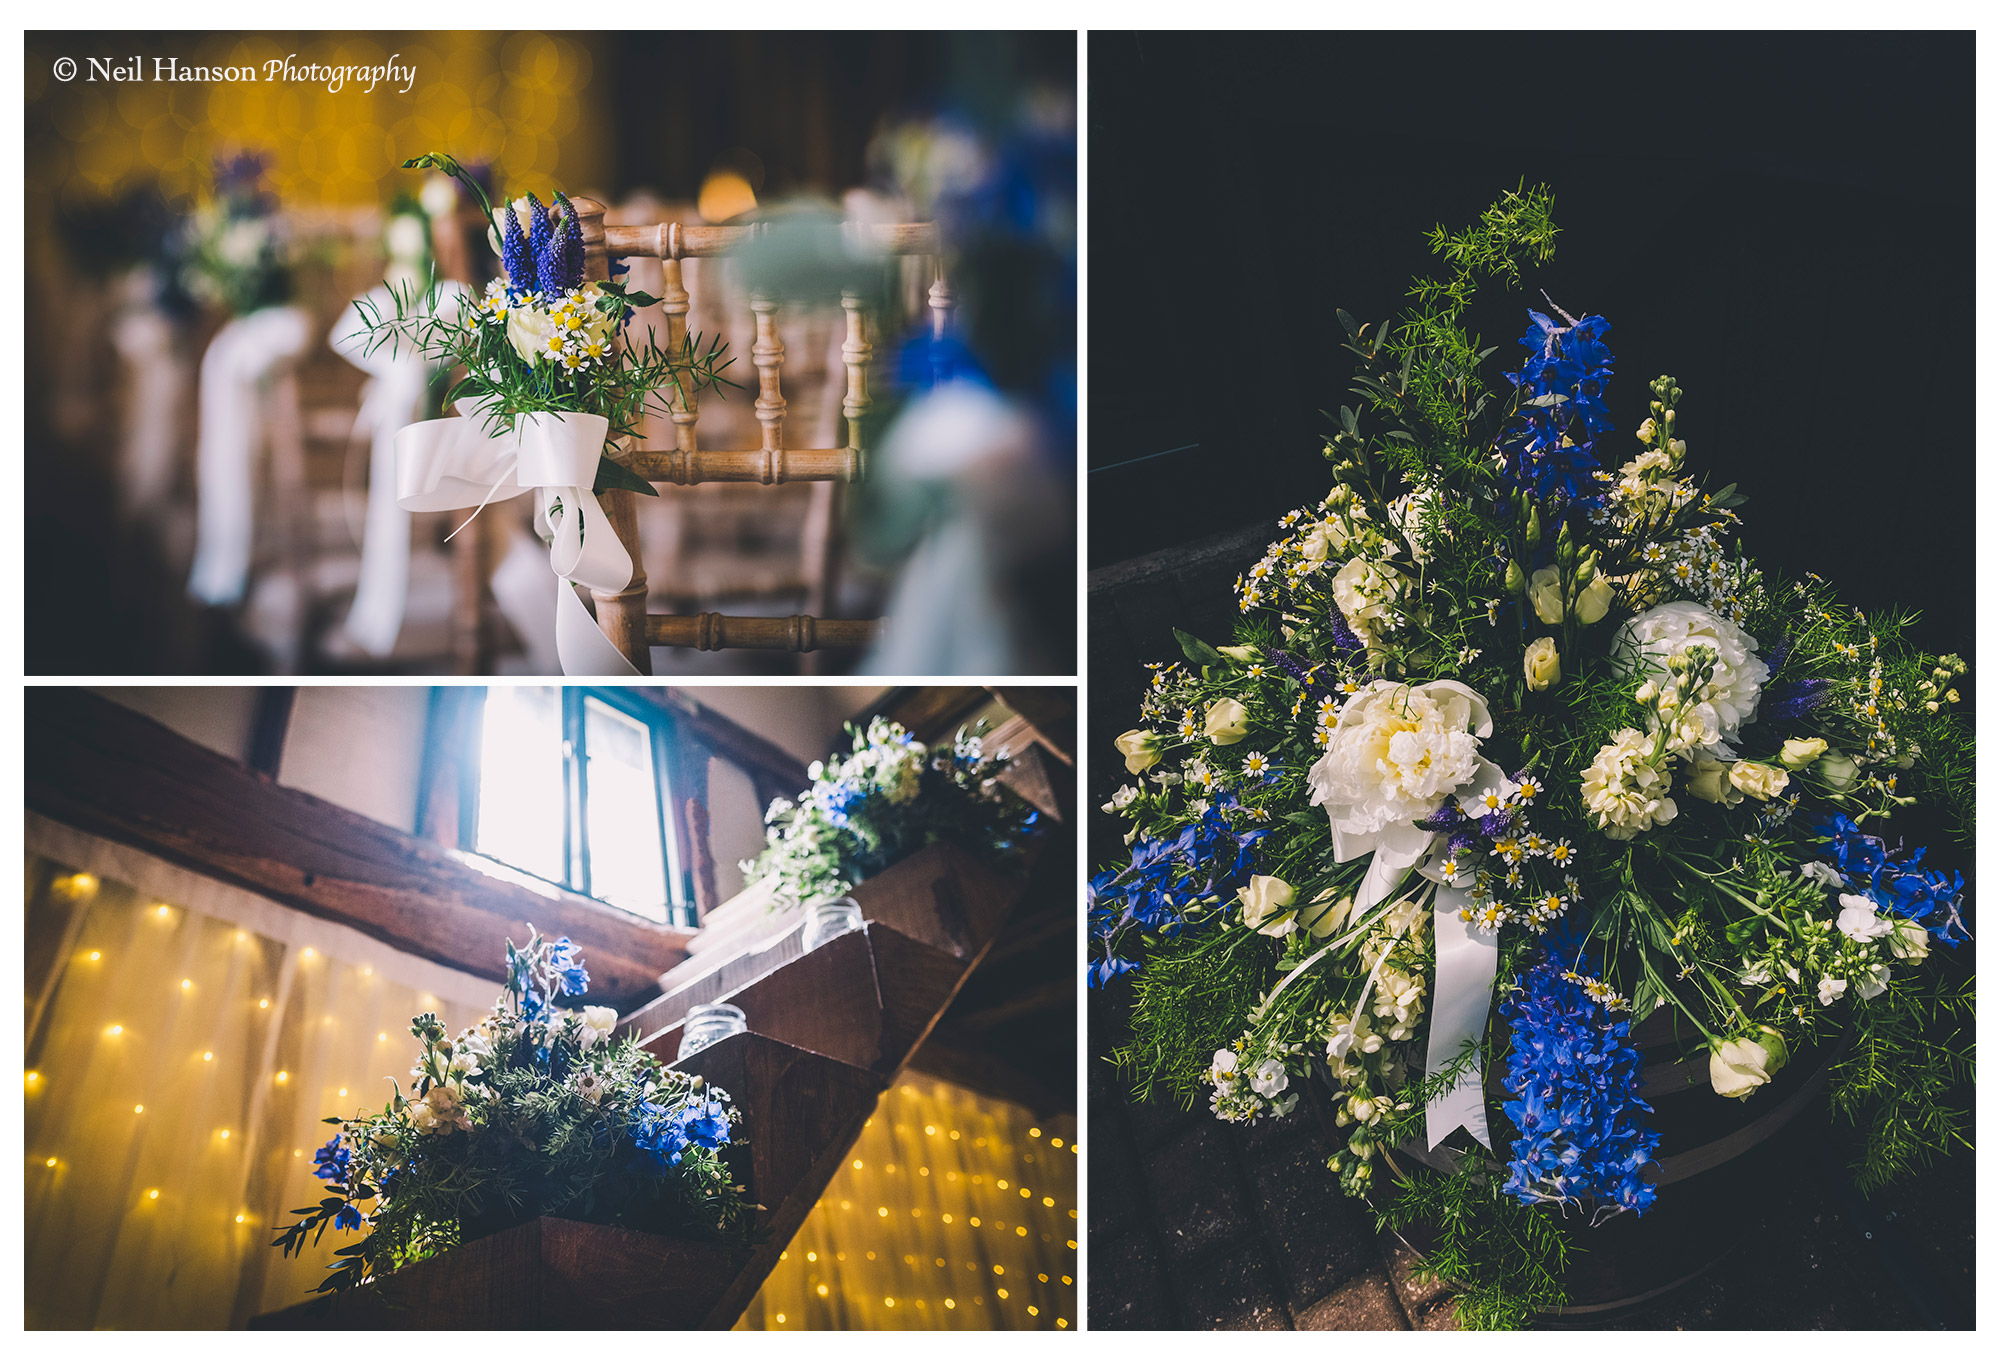 Flowers at The Old Luxters Barn Wedding Venue